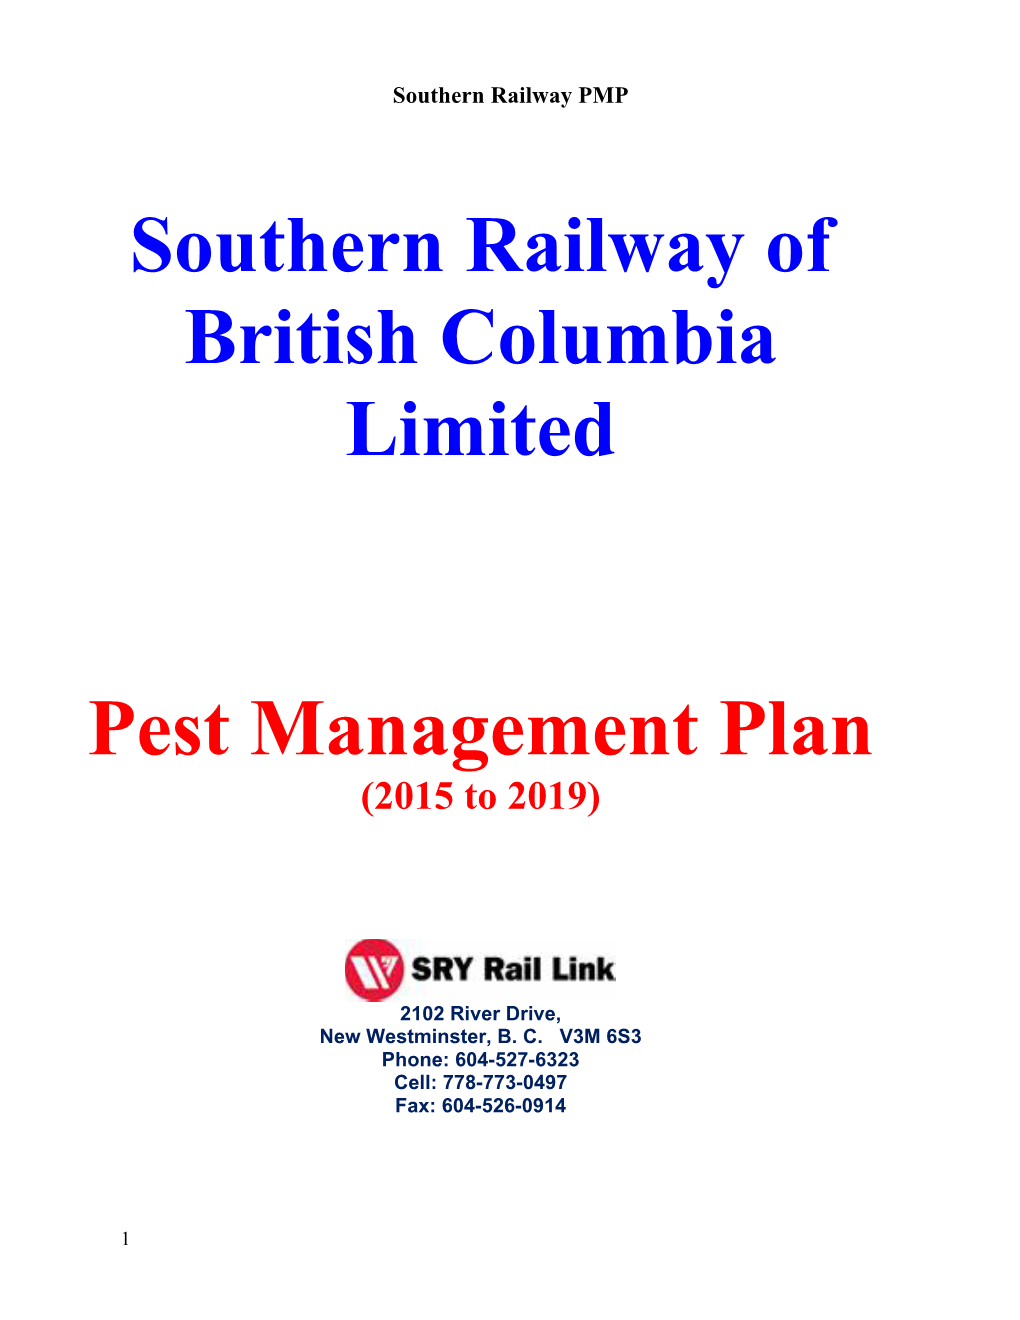 Southern Railway of British Columbia Limited Pest Management Plan